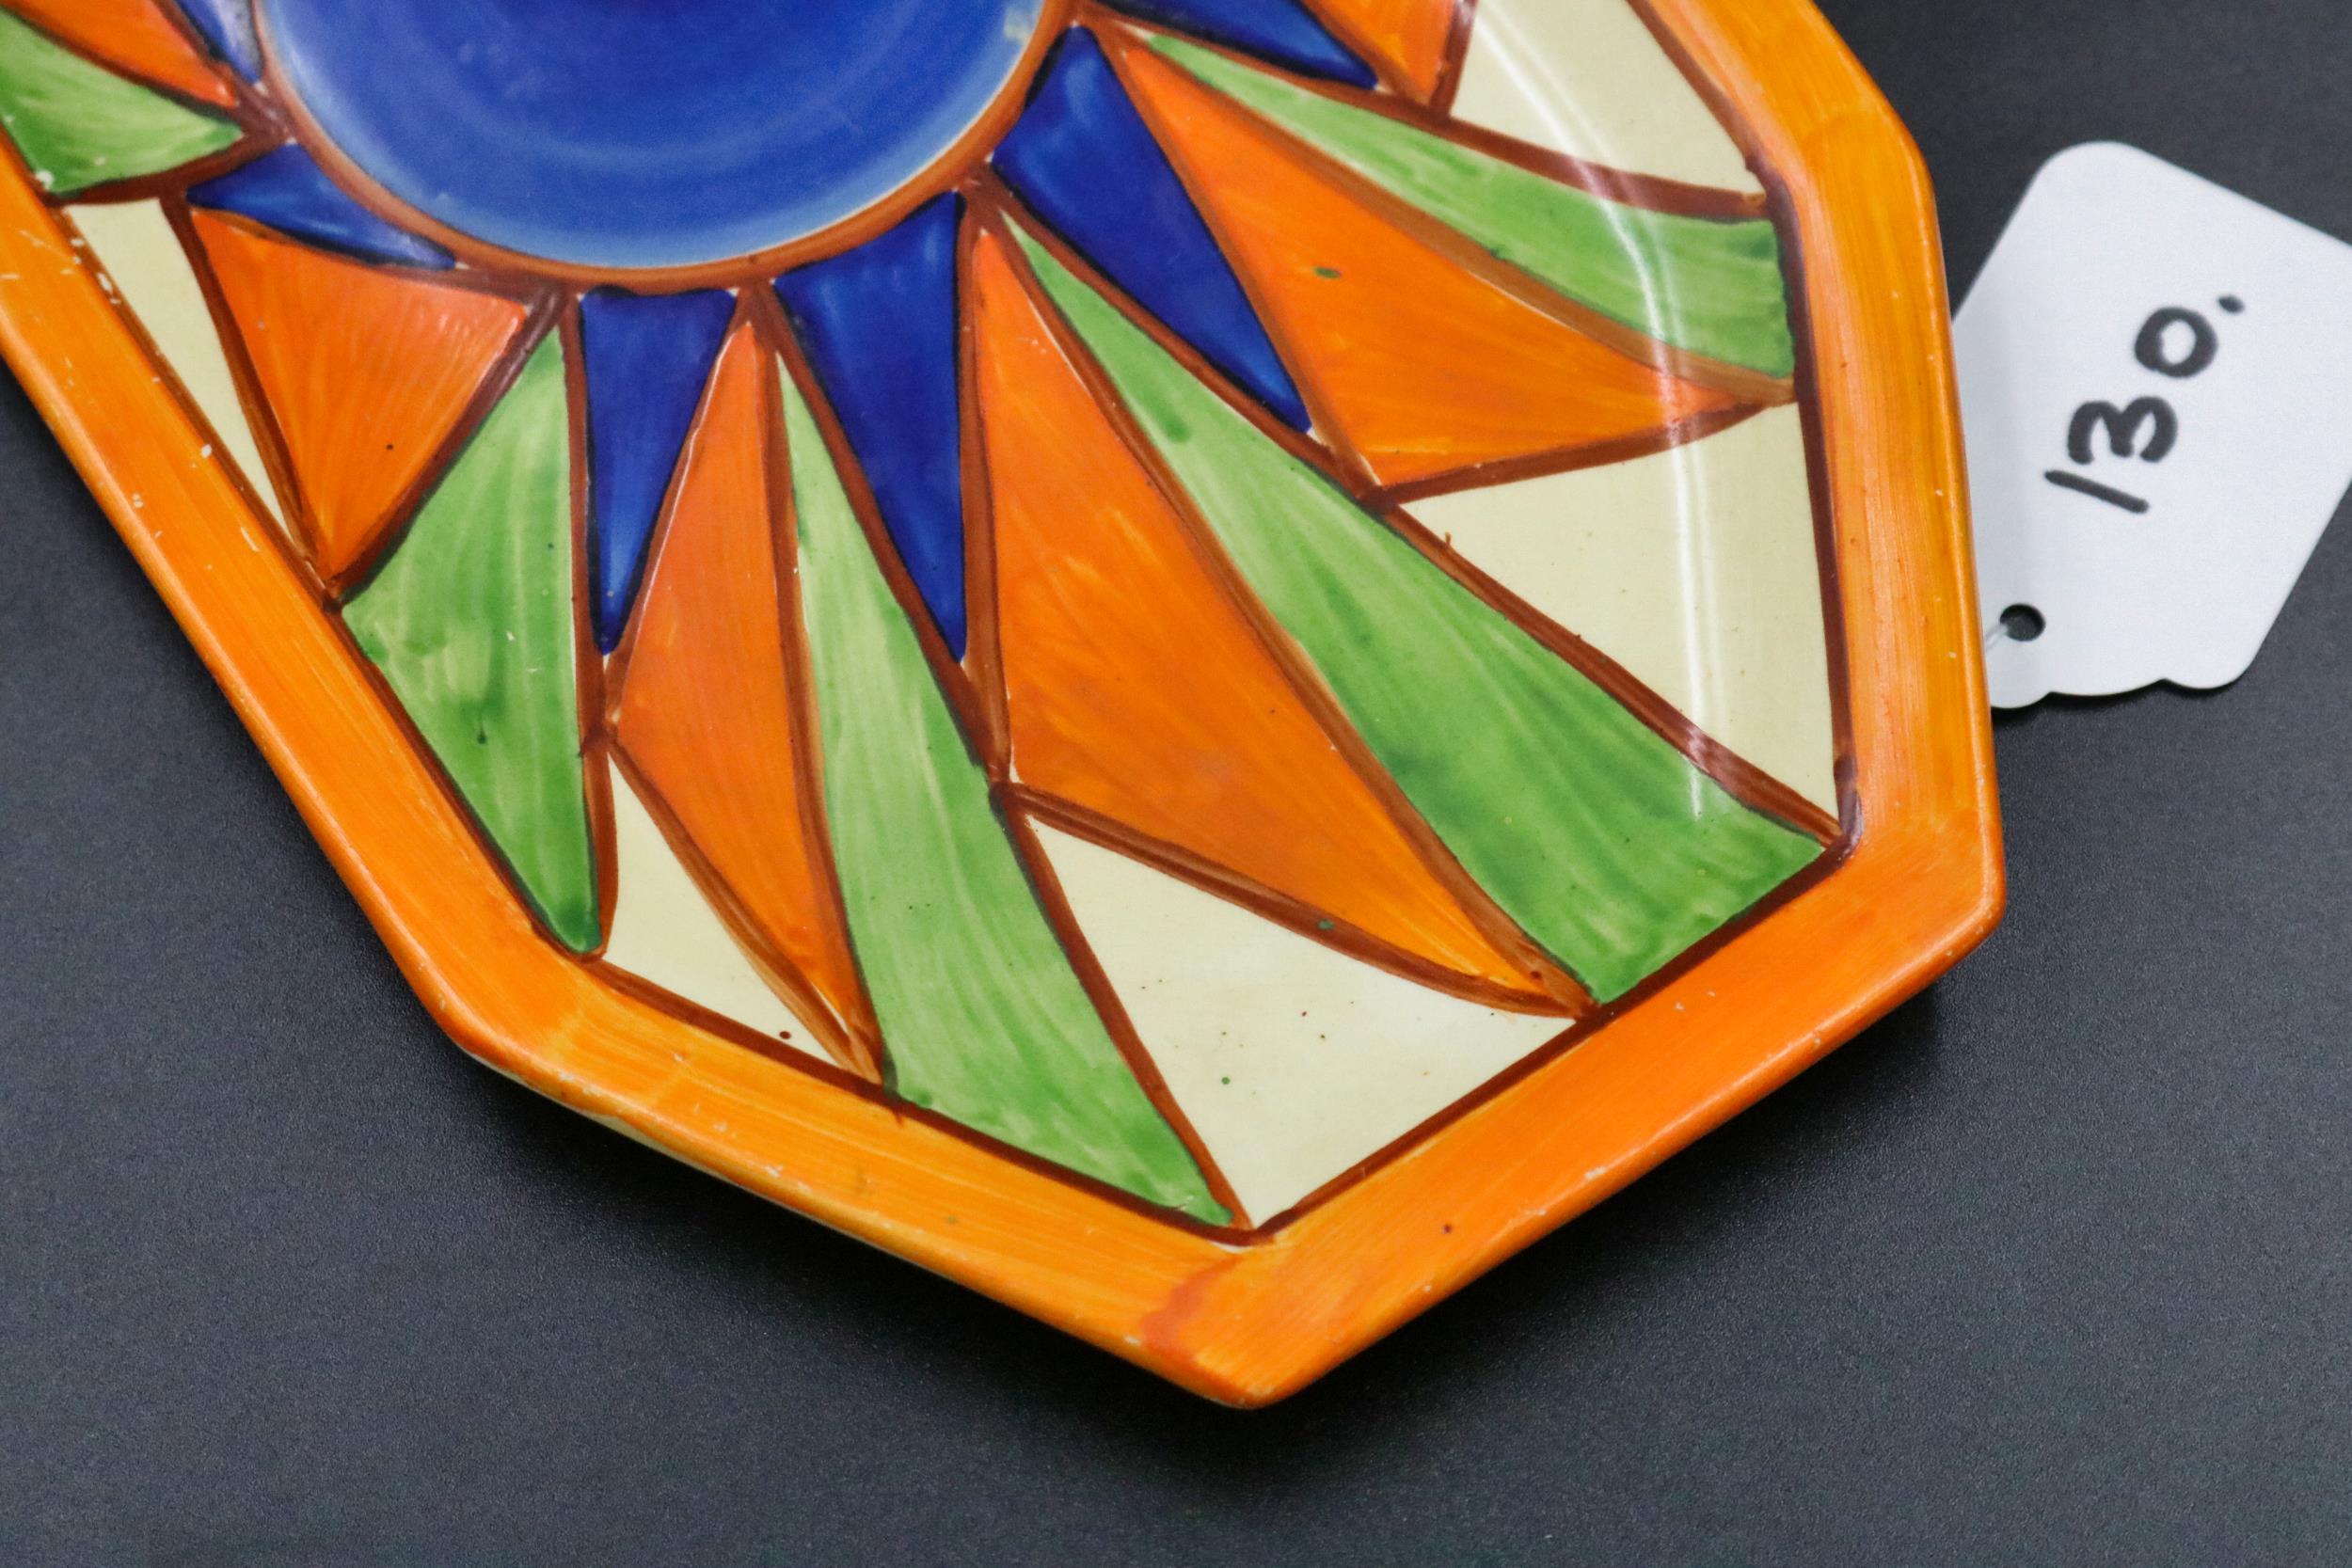 Clarice Cliff, Bizarre pattern sandwich plate - Newport pottery 11.52 x 6" some paint flaking - Image 6 of 8